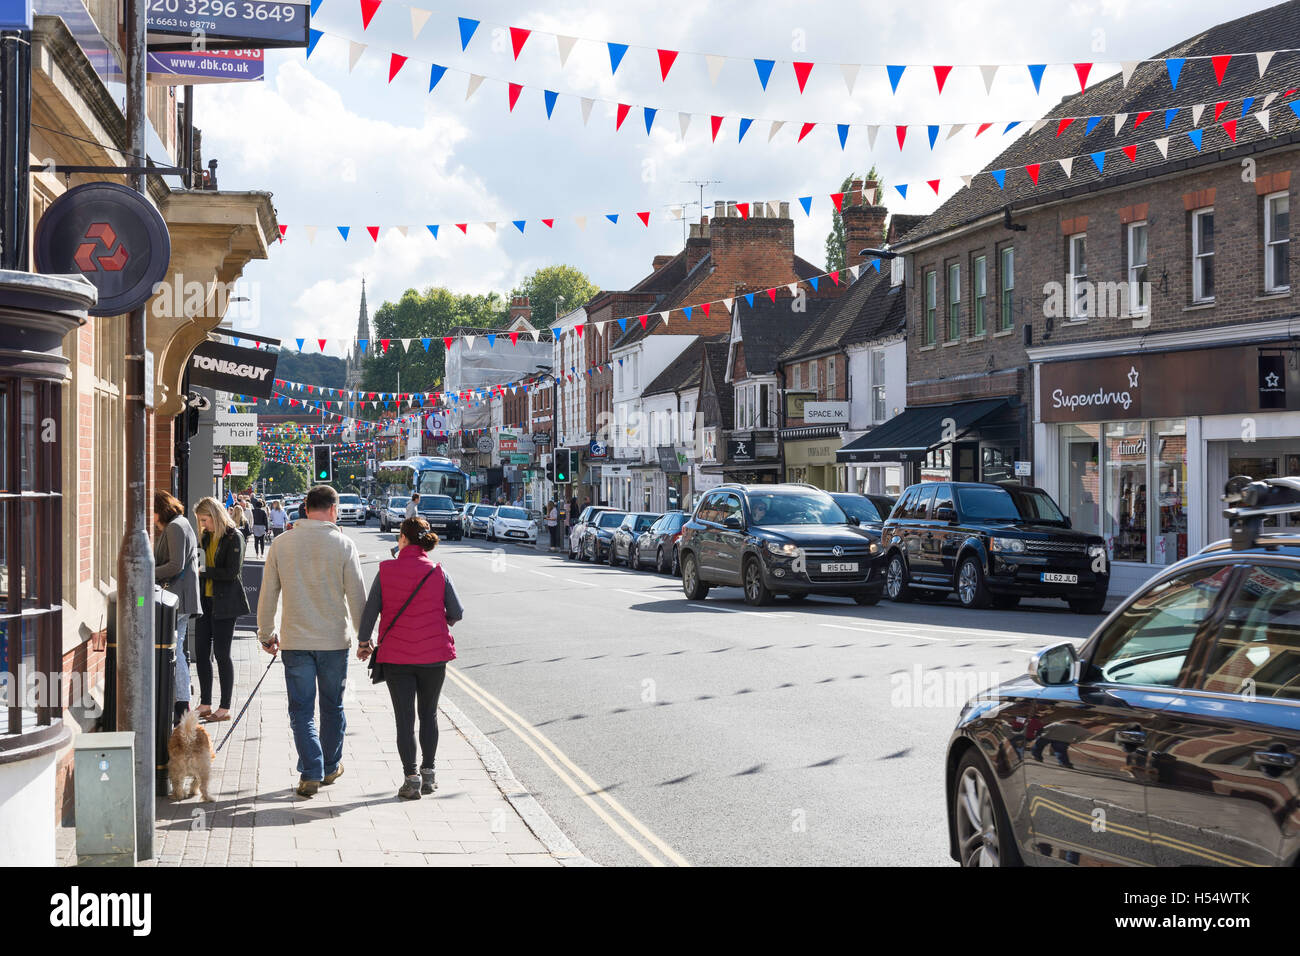 High Street, West Wycombe, Buckinghamshire, Angleterre, Royaume-Uni Banque D'Images